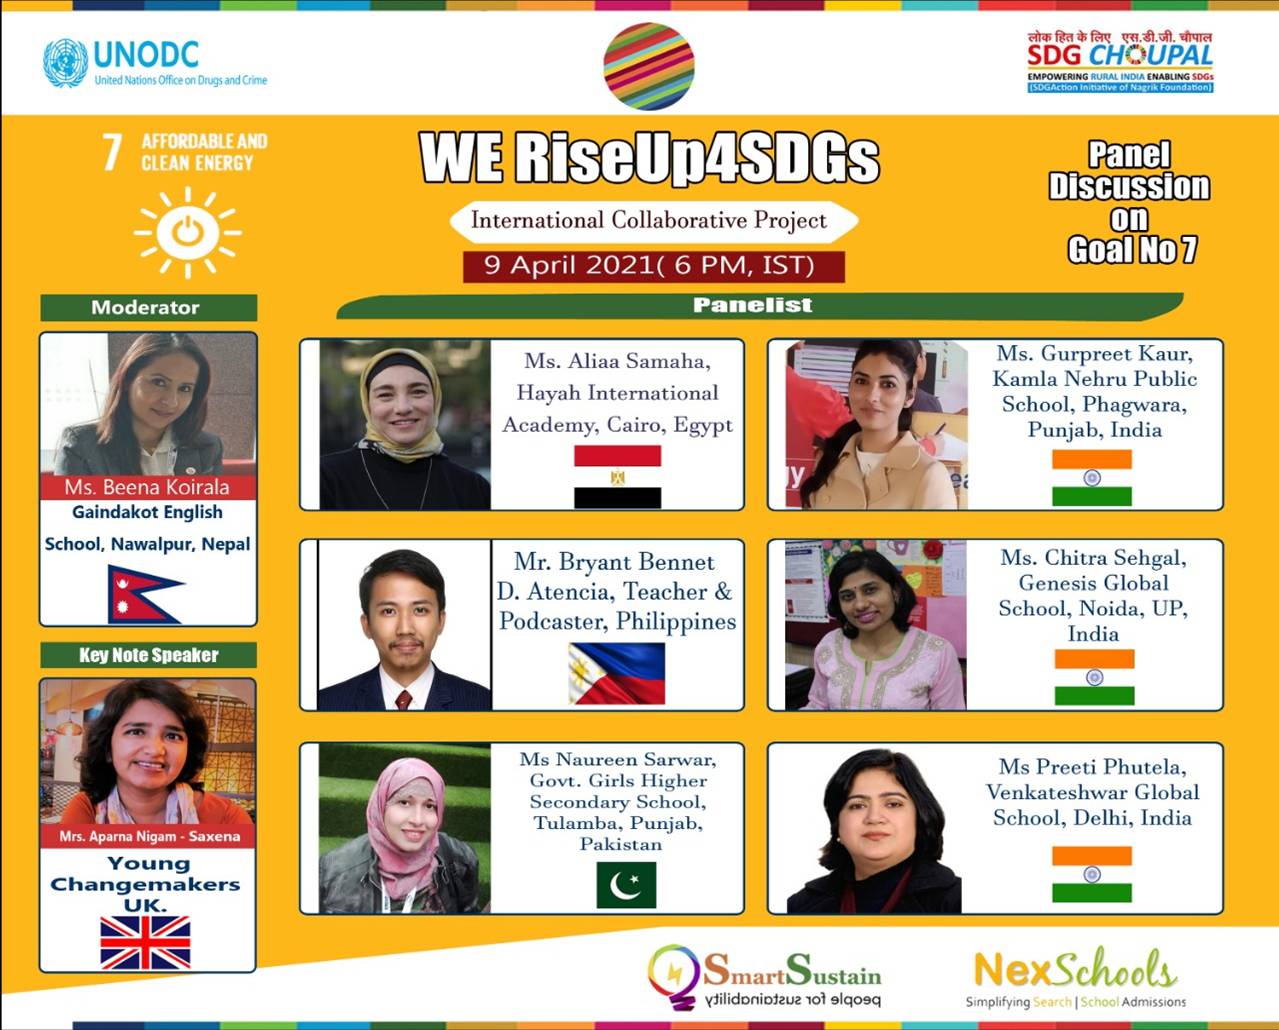 Panelsits for SDG7 discussion from school, SChool Teacher discussion panel from Egypt, Phillipines, Malaysia, India Brought to you for RiseUp4SDGs by NexSchools.com, Nes for education